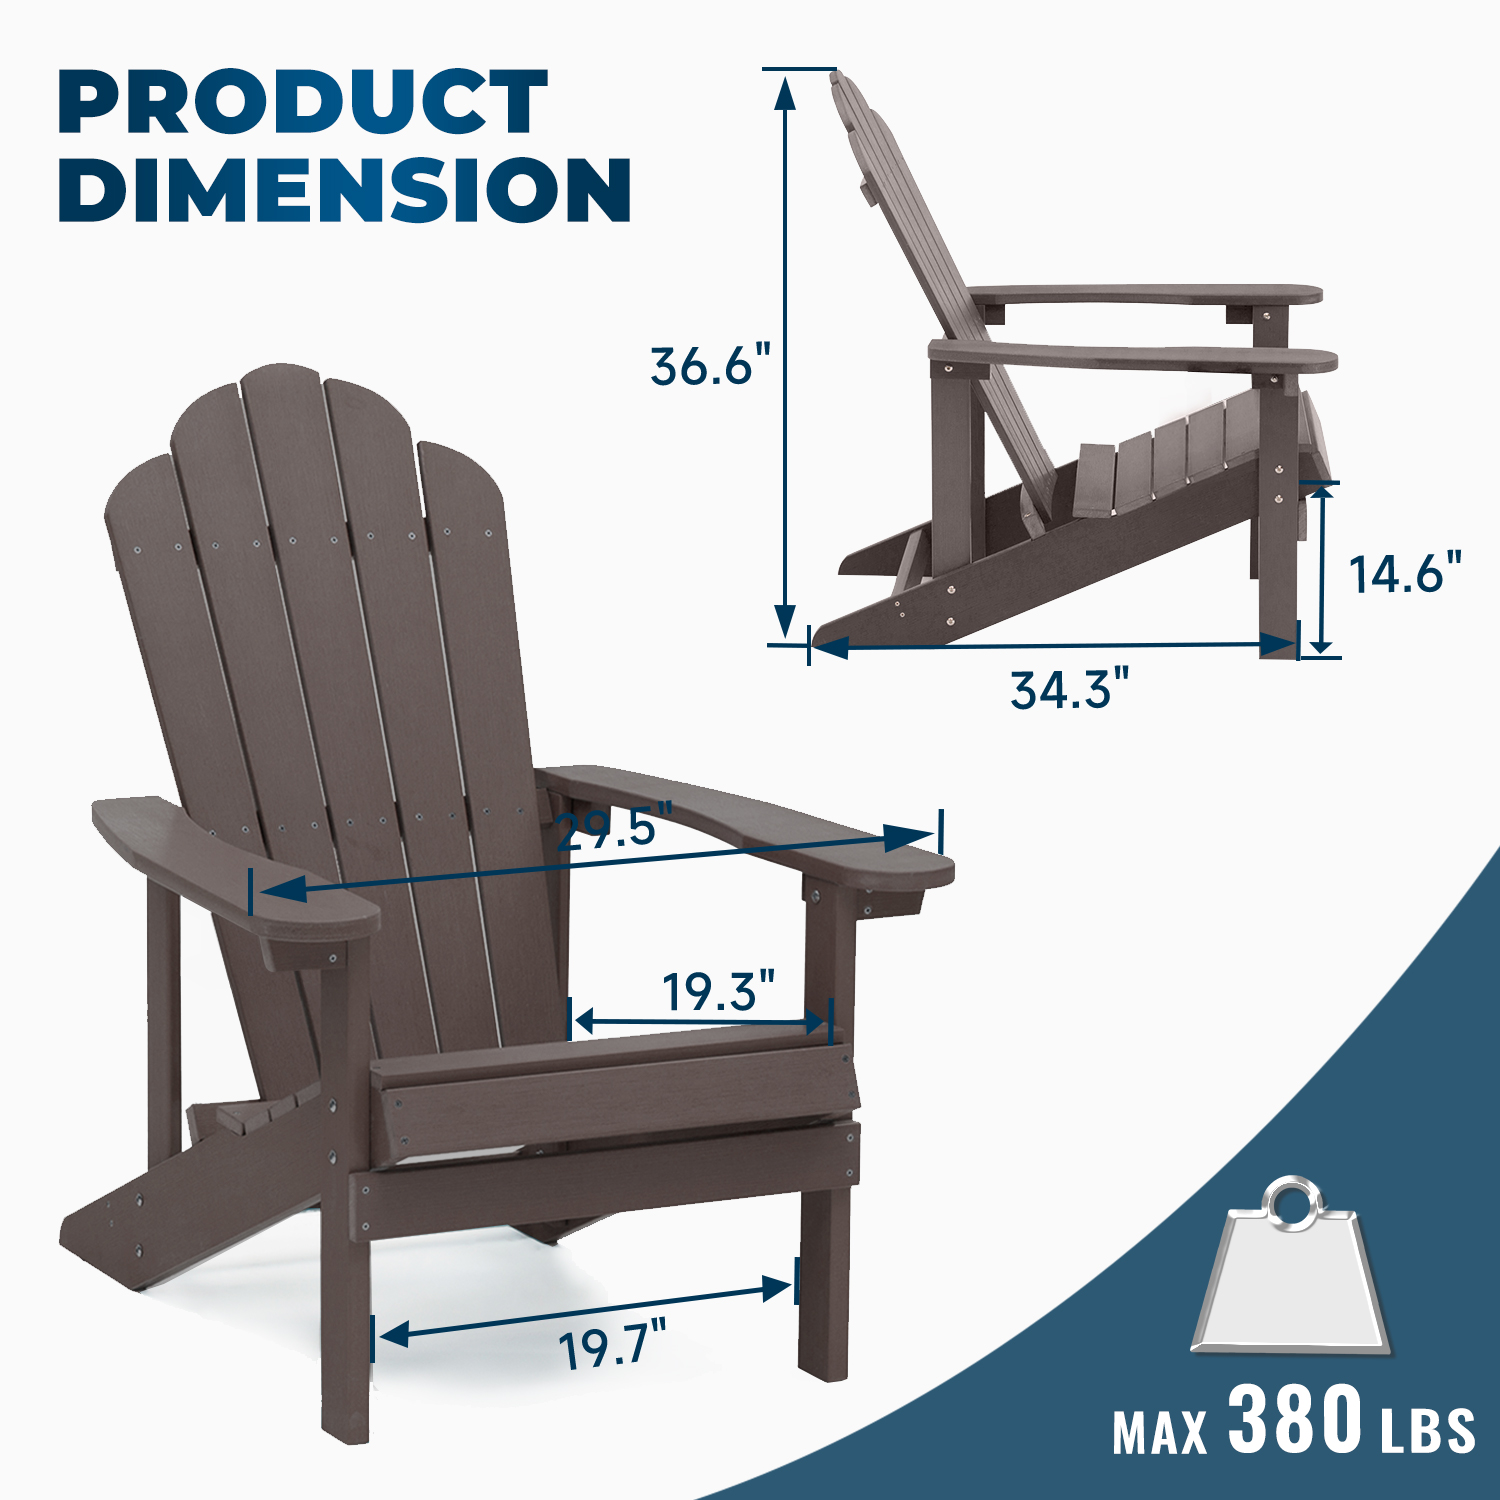 Sunny Shower Weather Resistant Accent Furniture Fold Outdoor Adirondack Chair for Garden Porch Patio - image 4 of 8